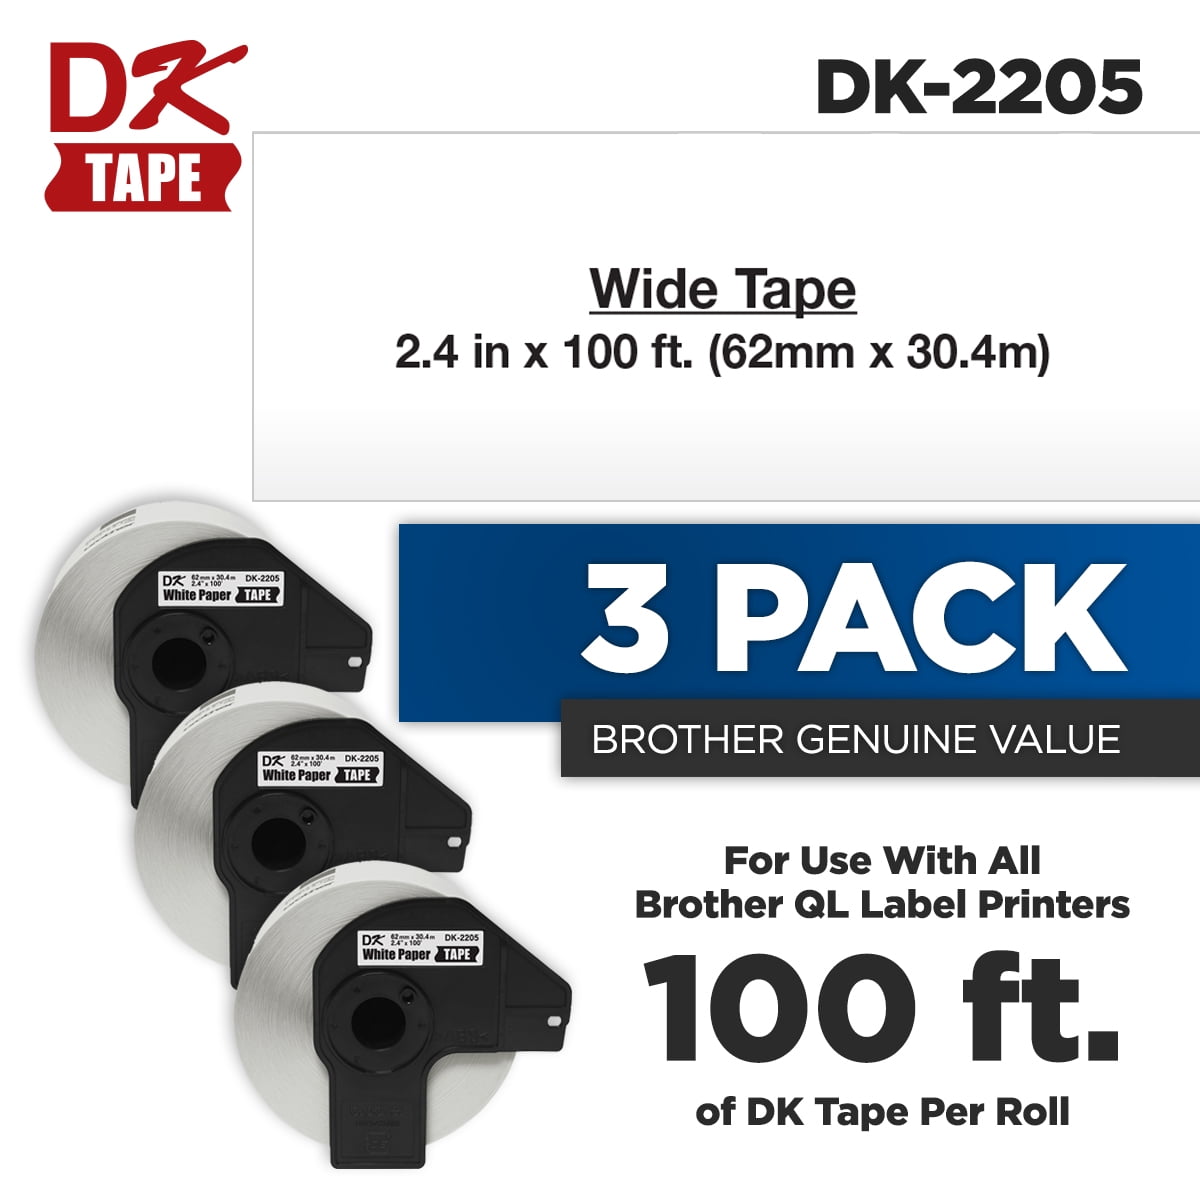 50 DK-2205 Replacement Rolls Compatible w/ Brother 